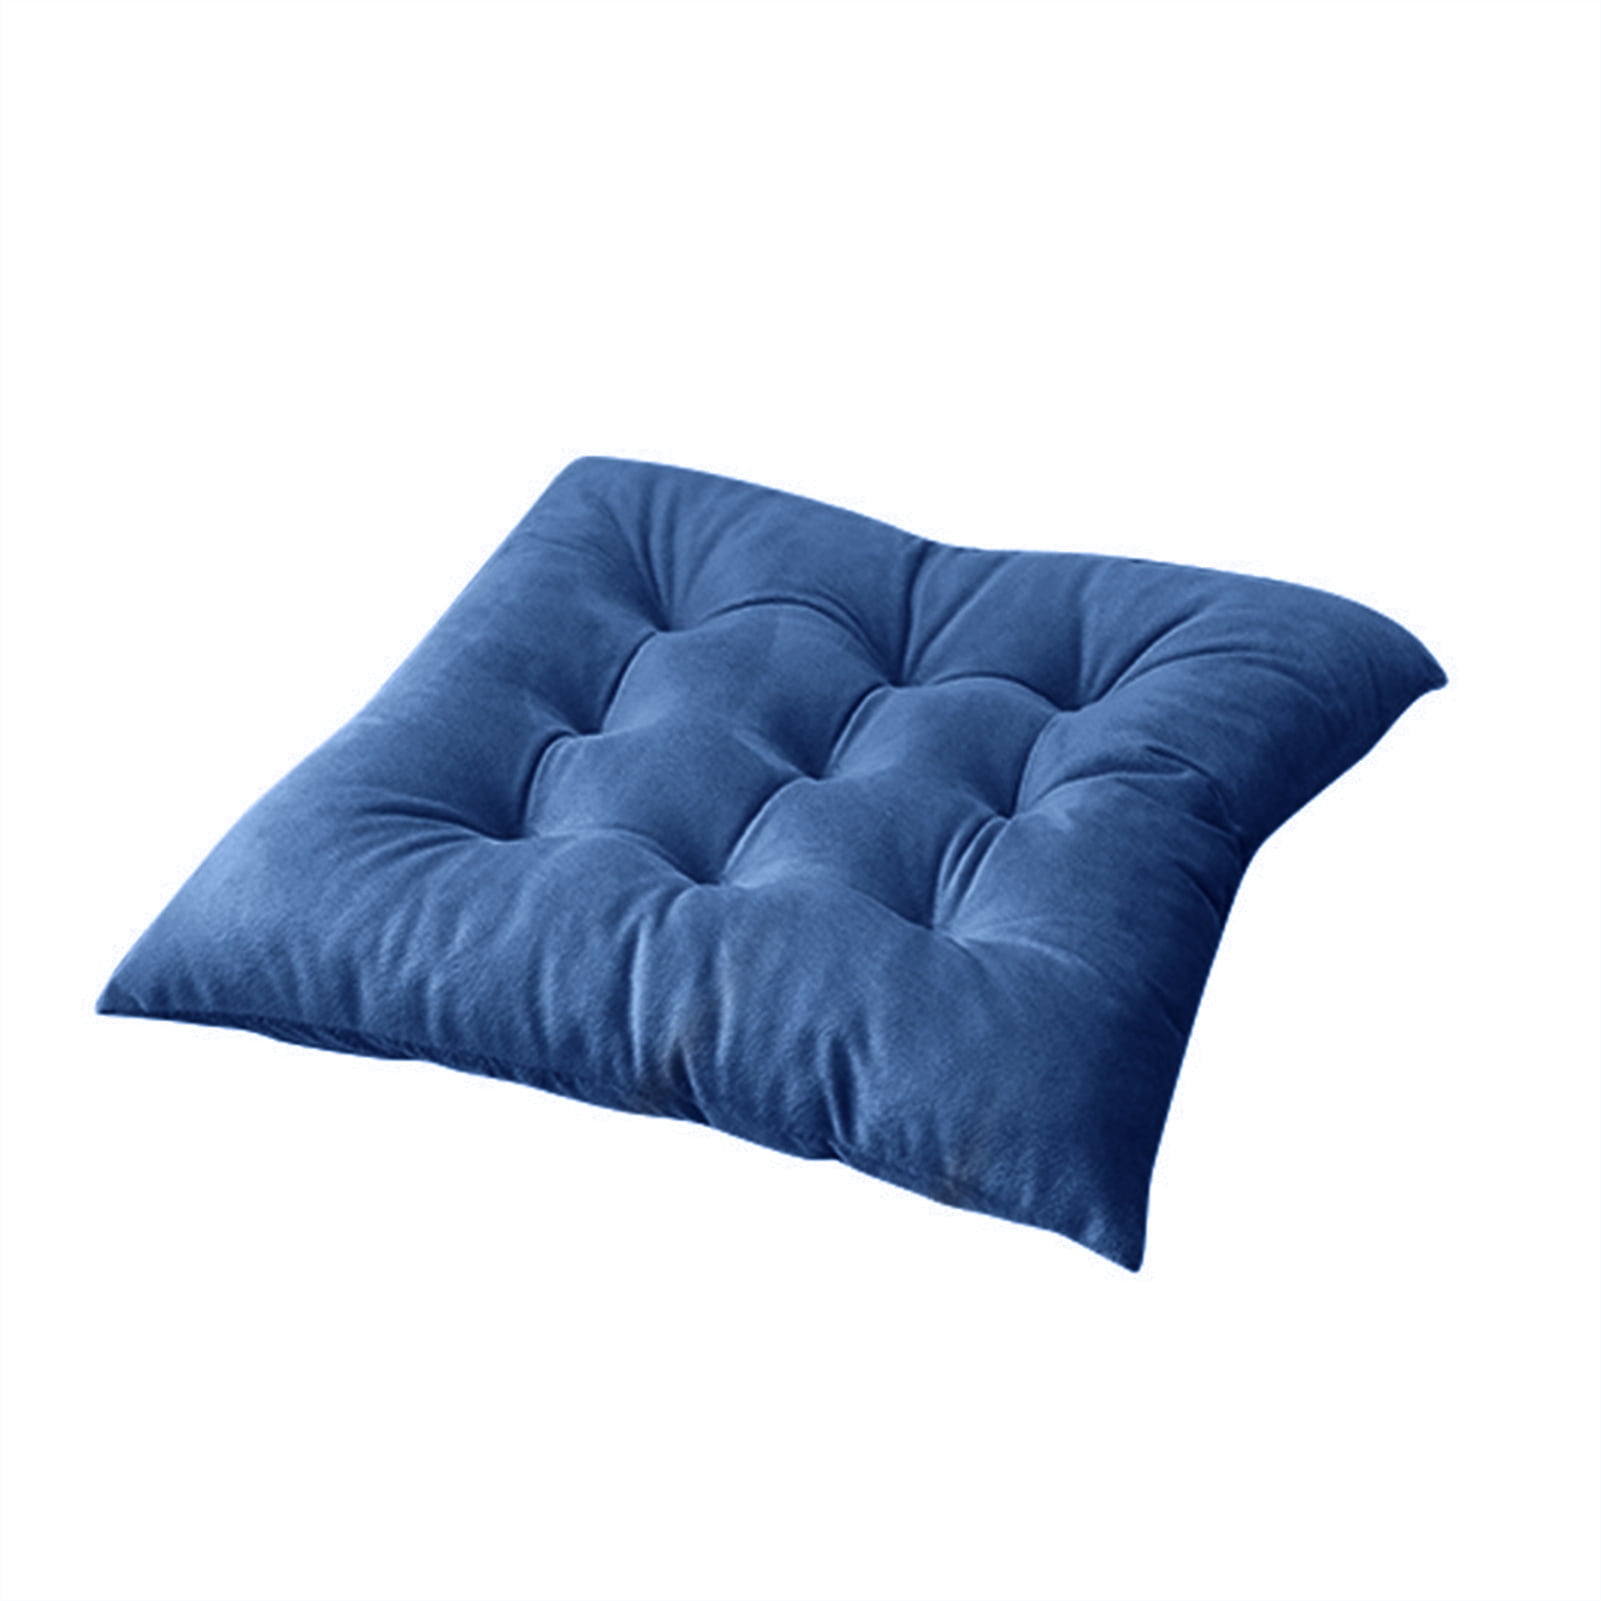 Shop Small Pillows For Chair online